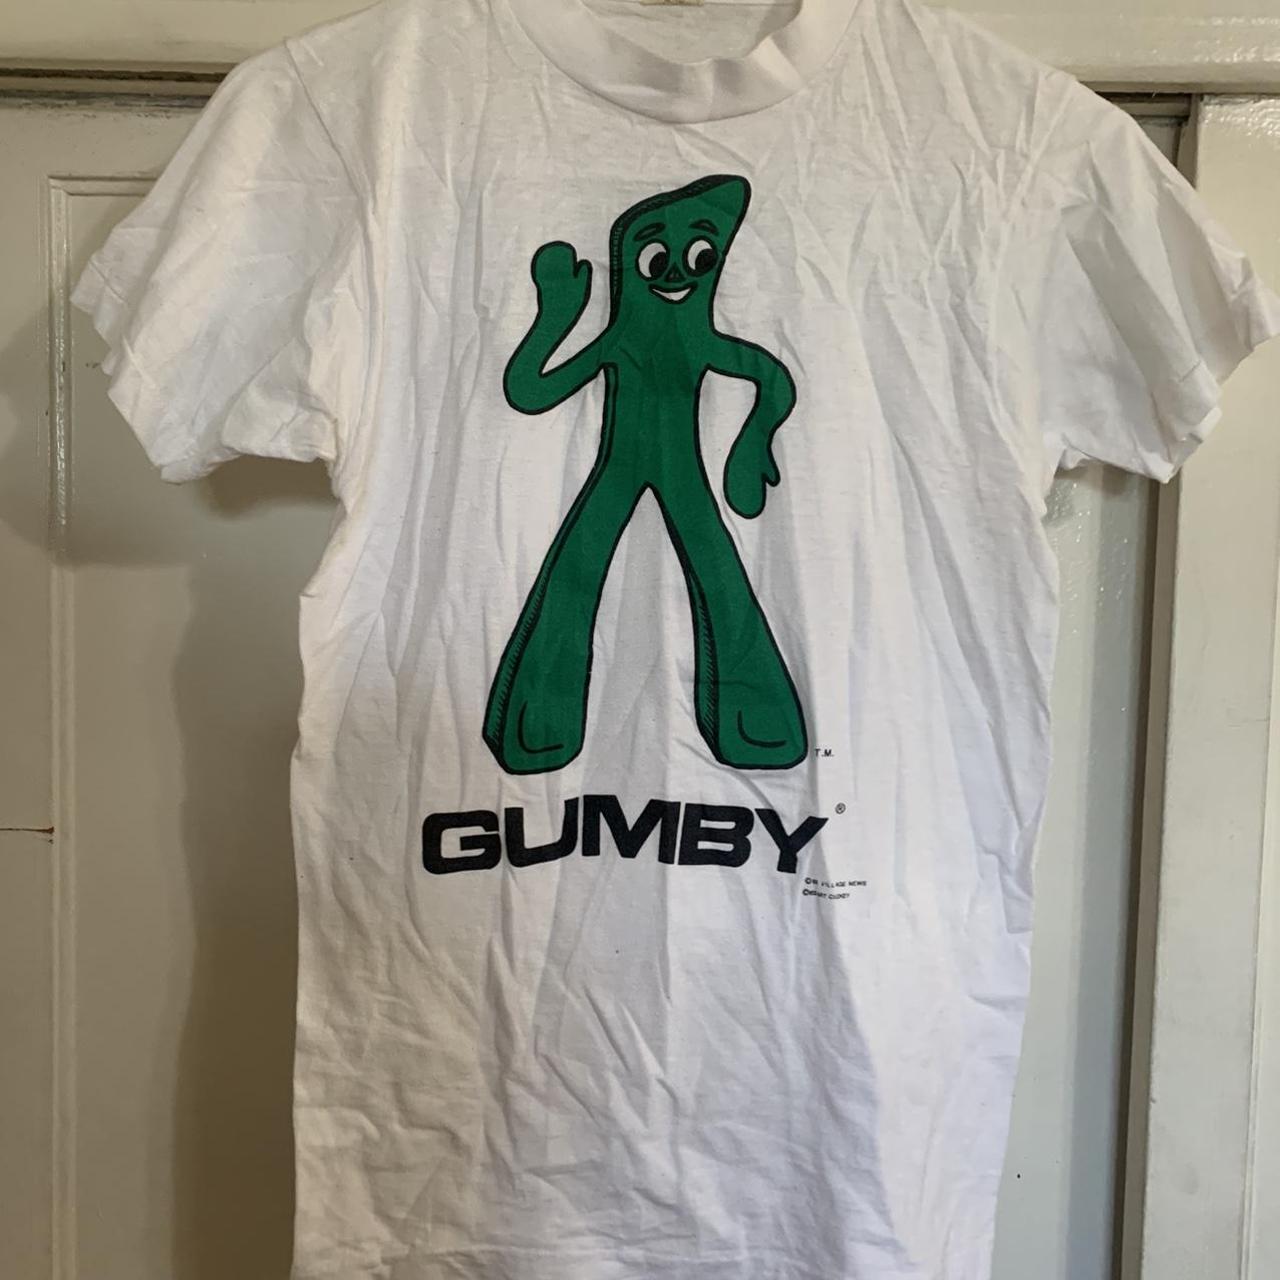 1983 Gumby T-shirt, Length - 25 Inch, Chest Across -...